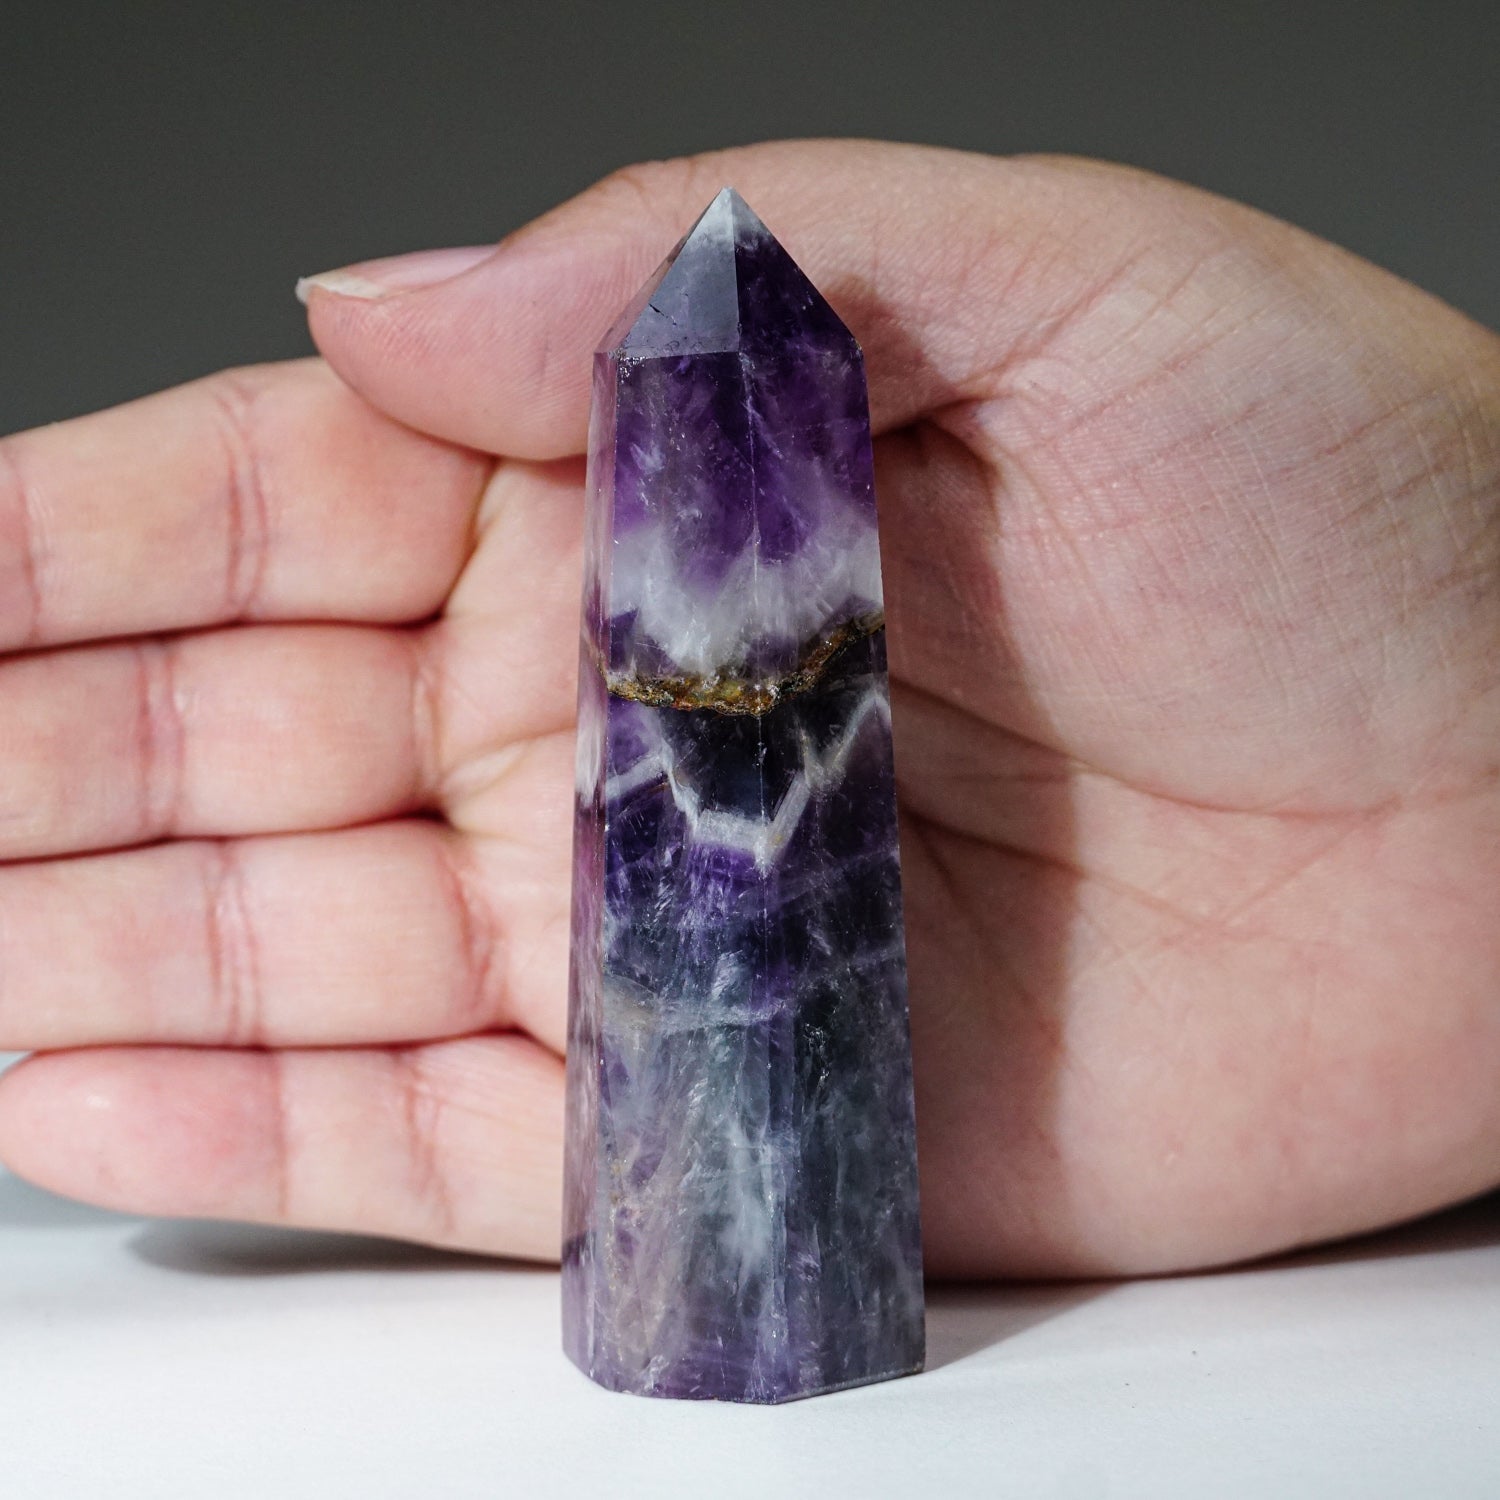 Polished Chevron Amethyst Point from Brazil (92.5 grams)